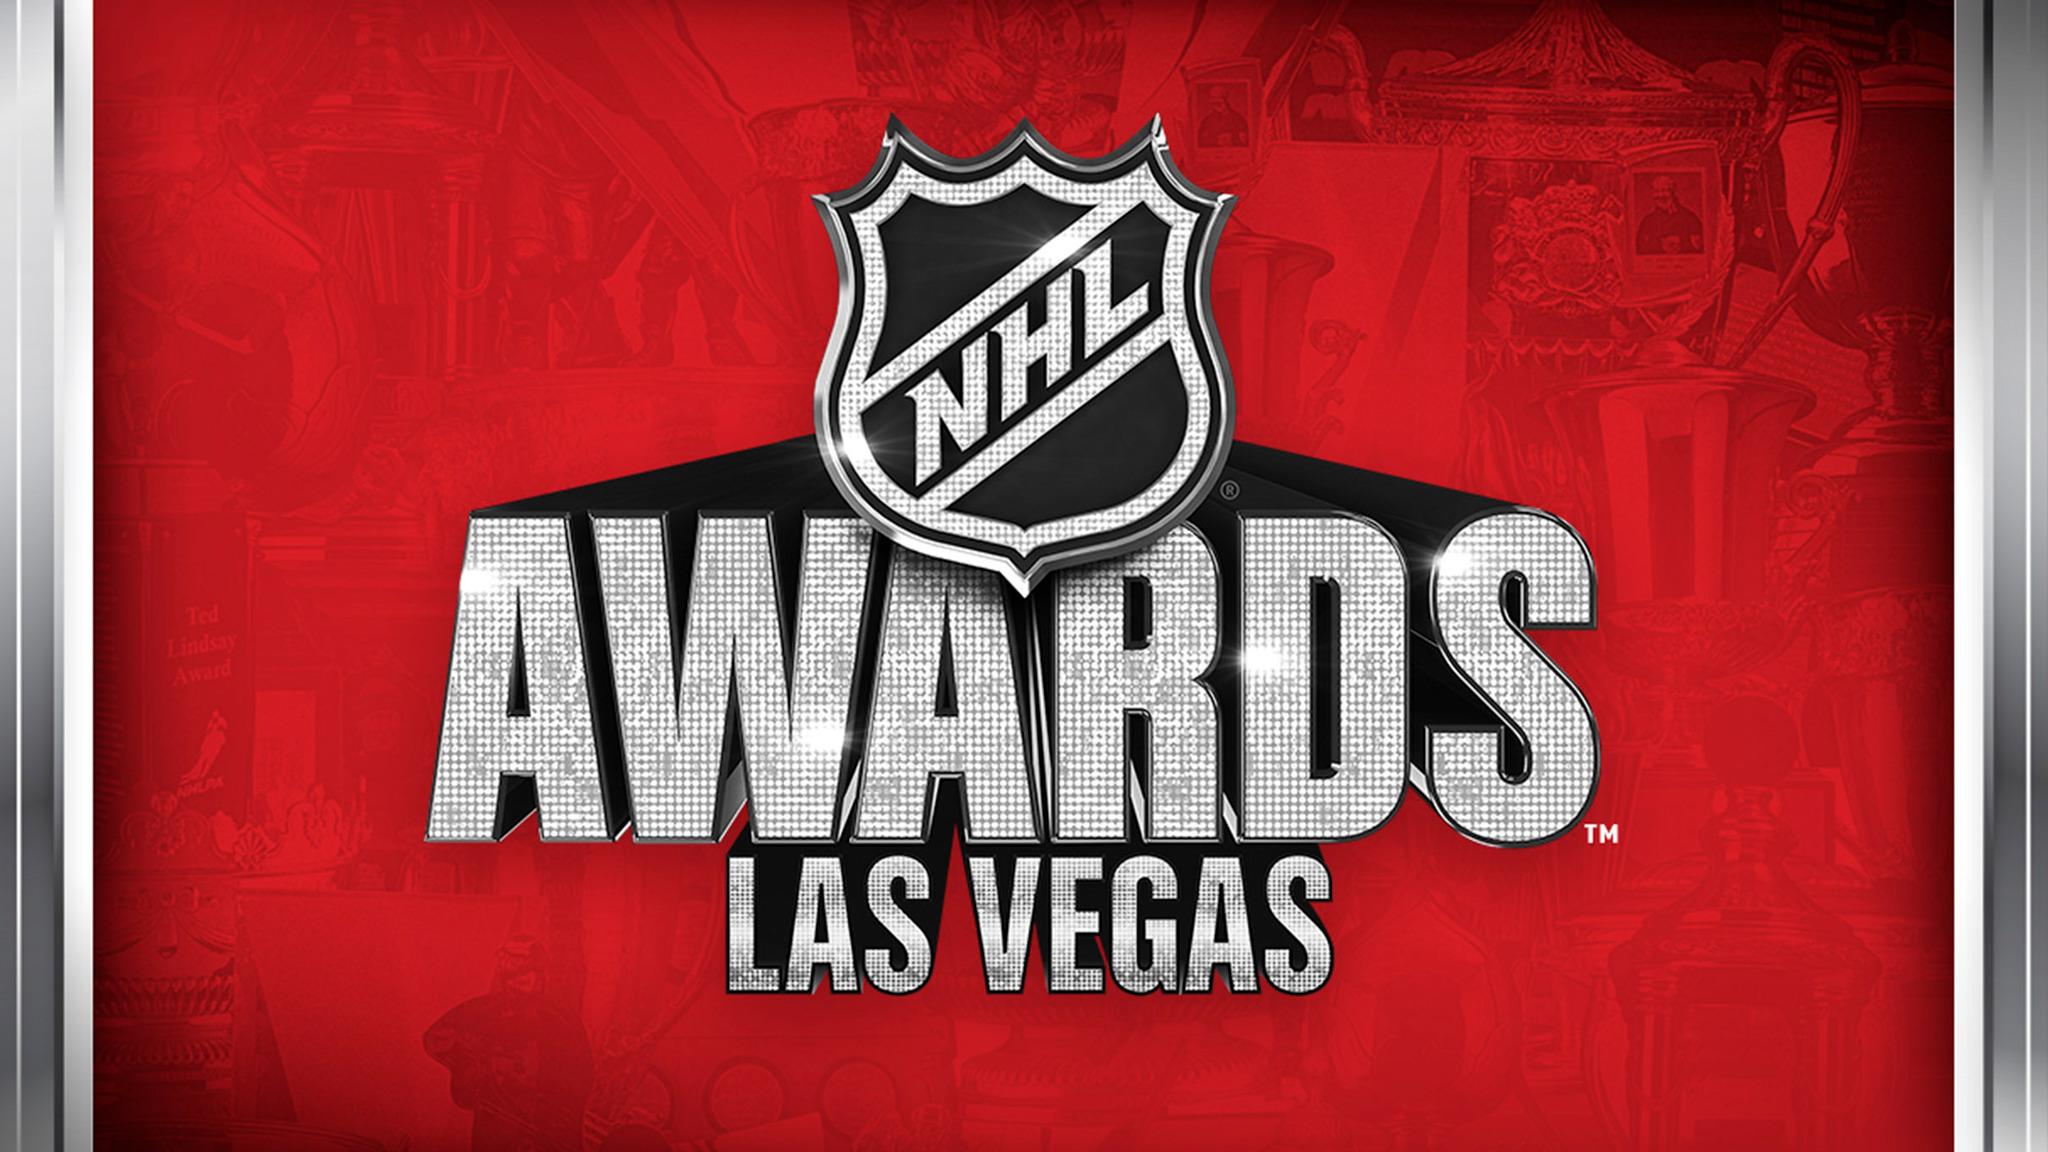 NHL Awards Tickets Single Game Tickets & Schedule Ticketmaster.ca